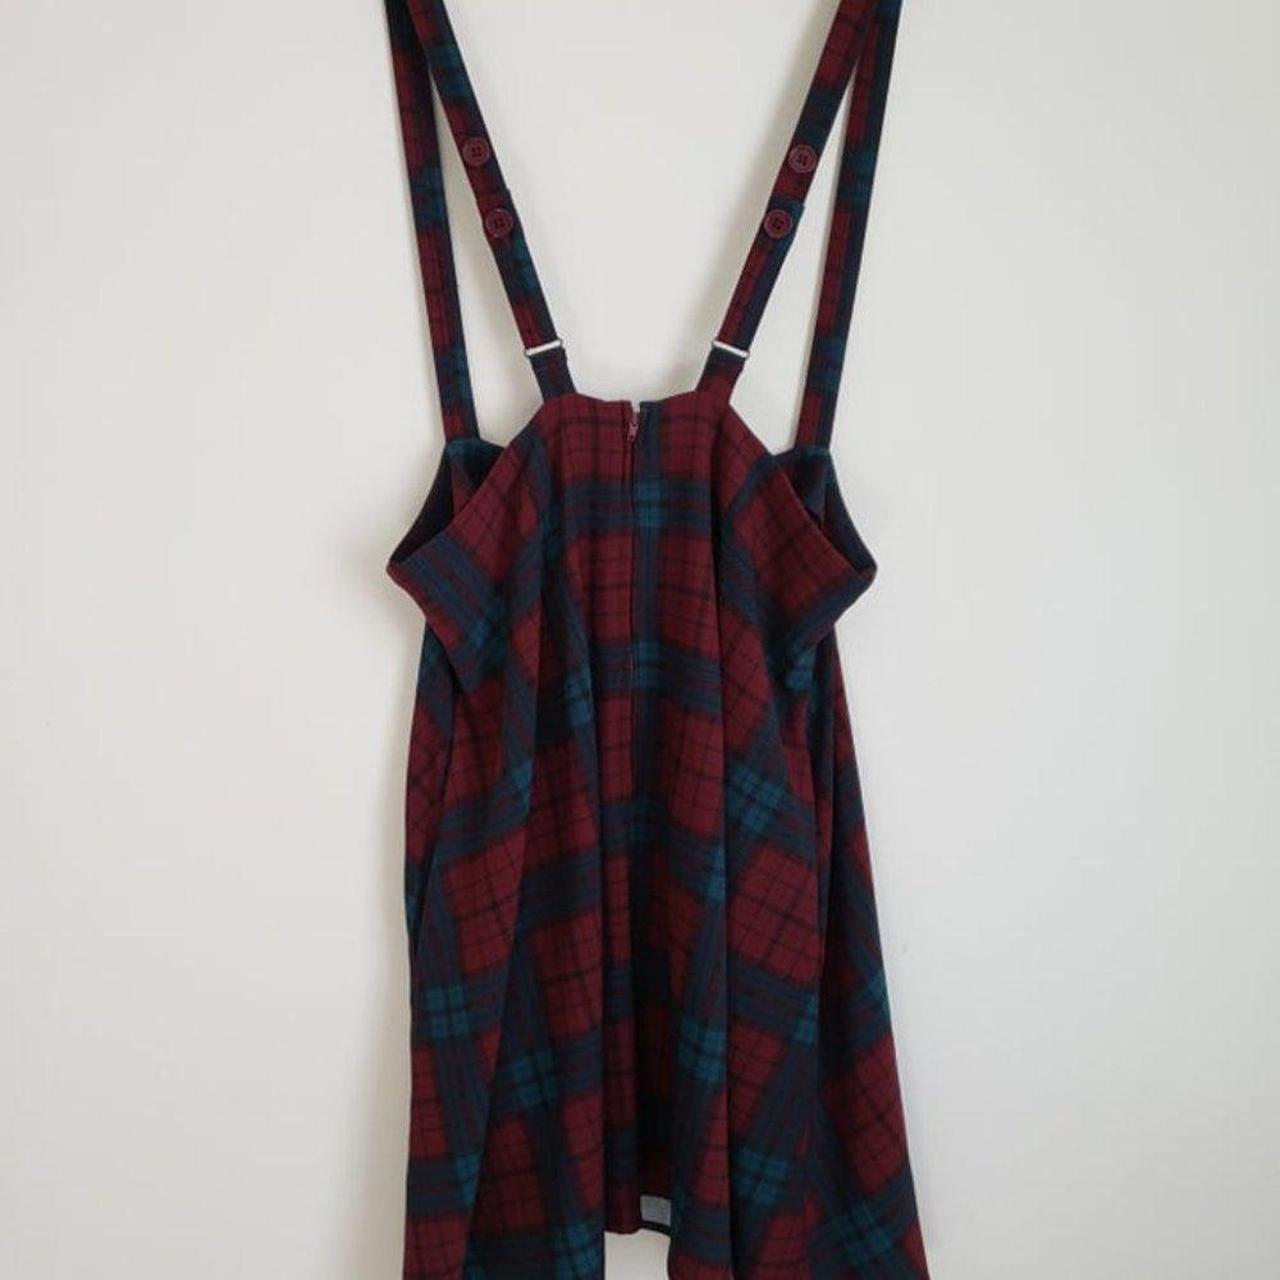 Product Image 4 - This dress is so cute